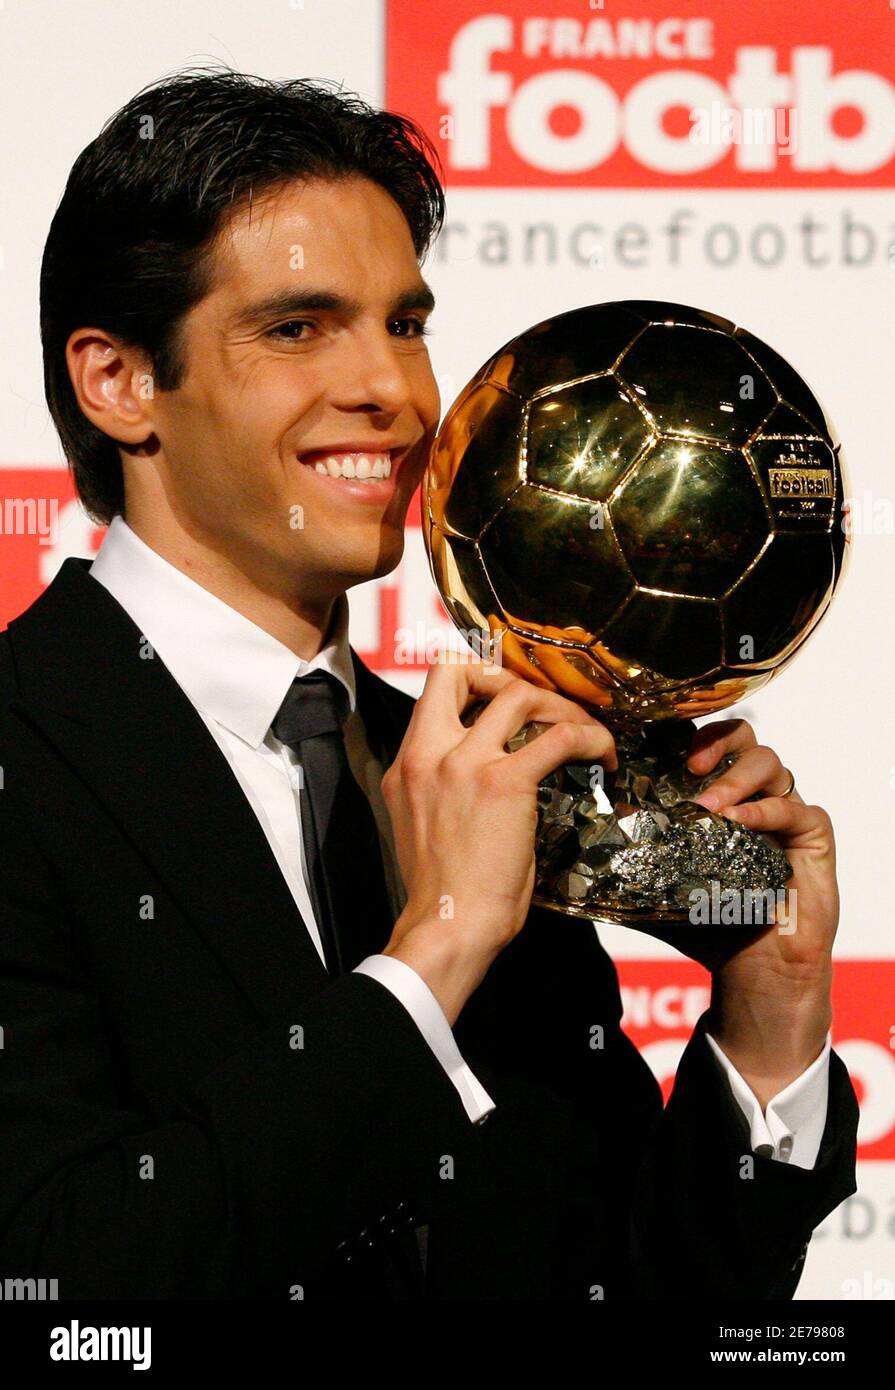 AC Milan and Brazil playmaker Kaka holds the 2007 Ballon d'Or trophy in  Paris December 2, 2007. Kaka was awarded the 2007 Ballon d'Or by French  magazine France Football and is already